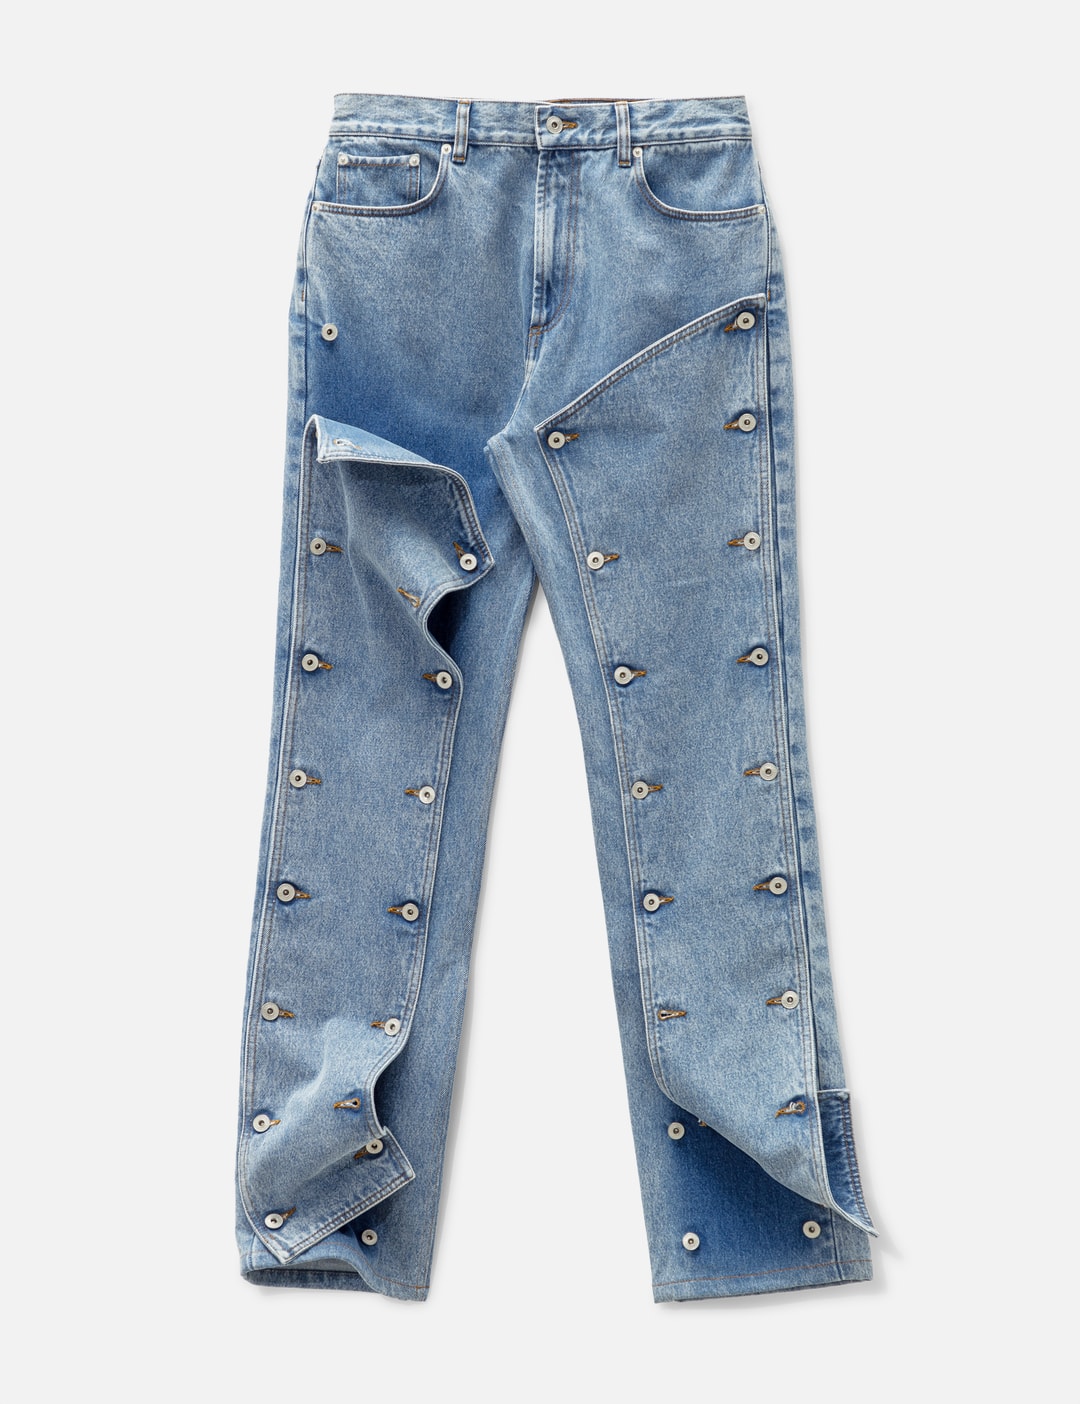 Y/PROJECT - SNAP OFF JEANS | HBX - Globally Curated Fashion and ...